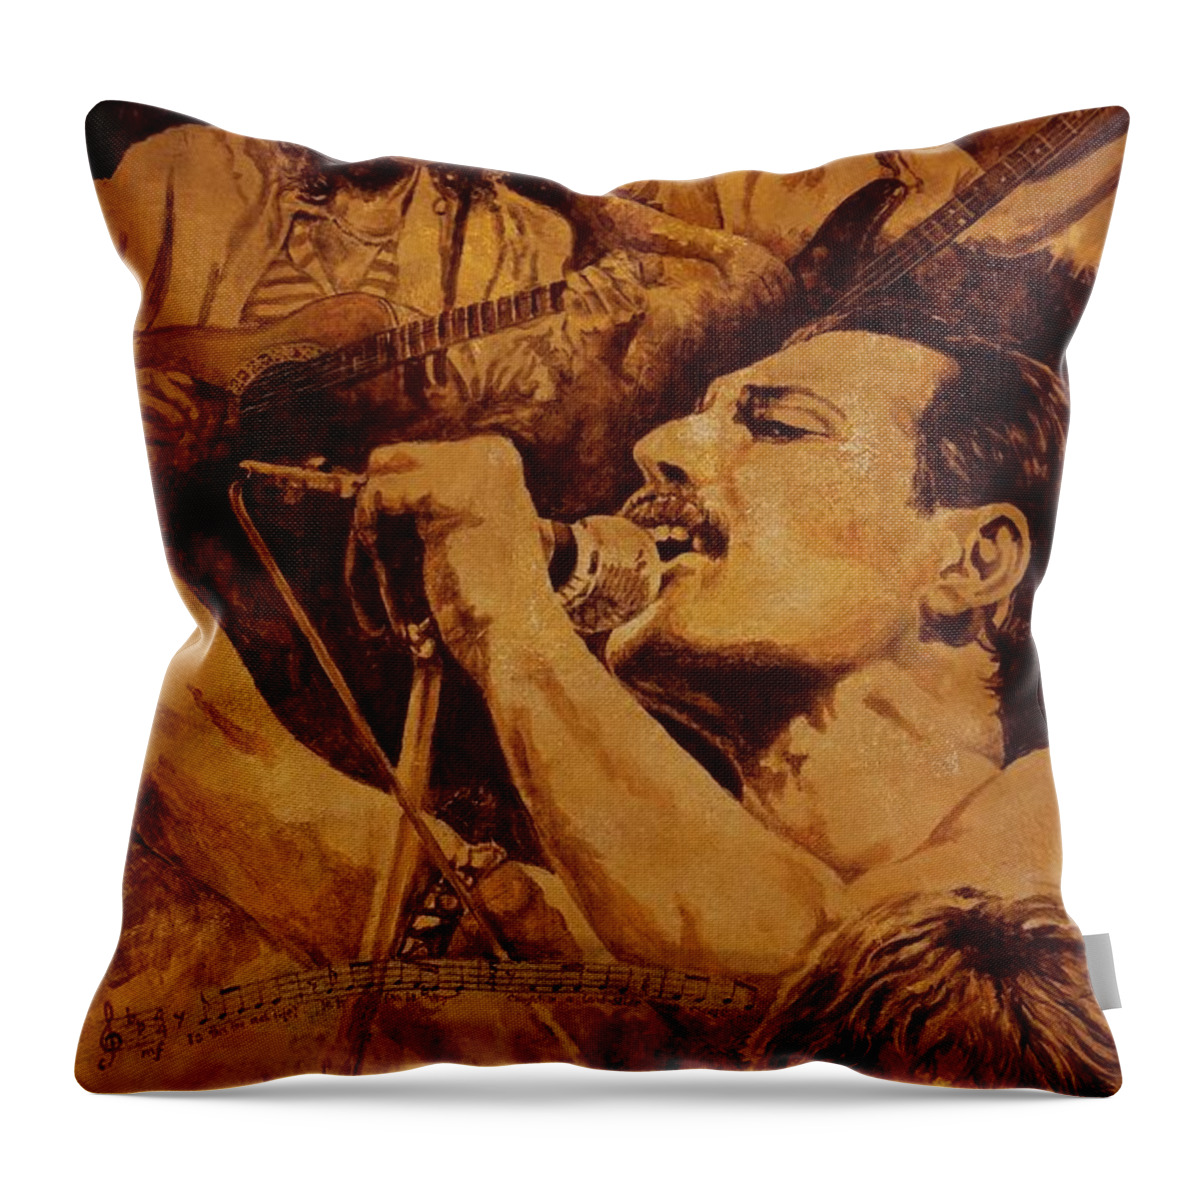 Queen Throw Pillow featuring the painting We Will Rock You by Igor Postash